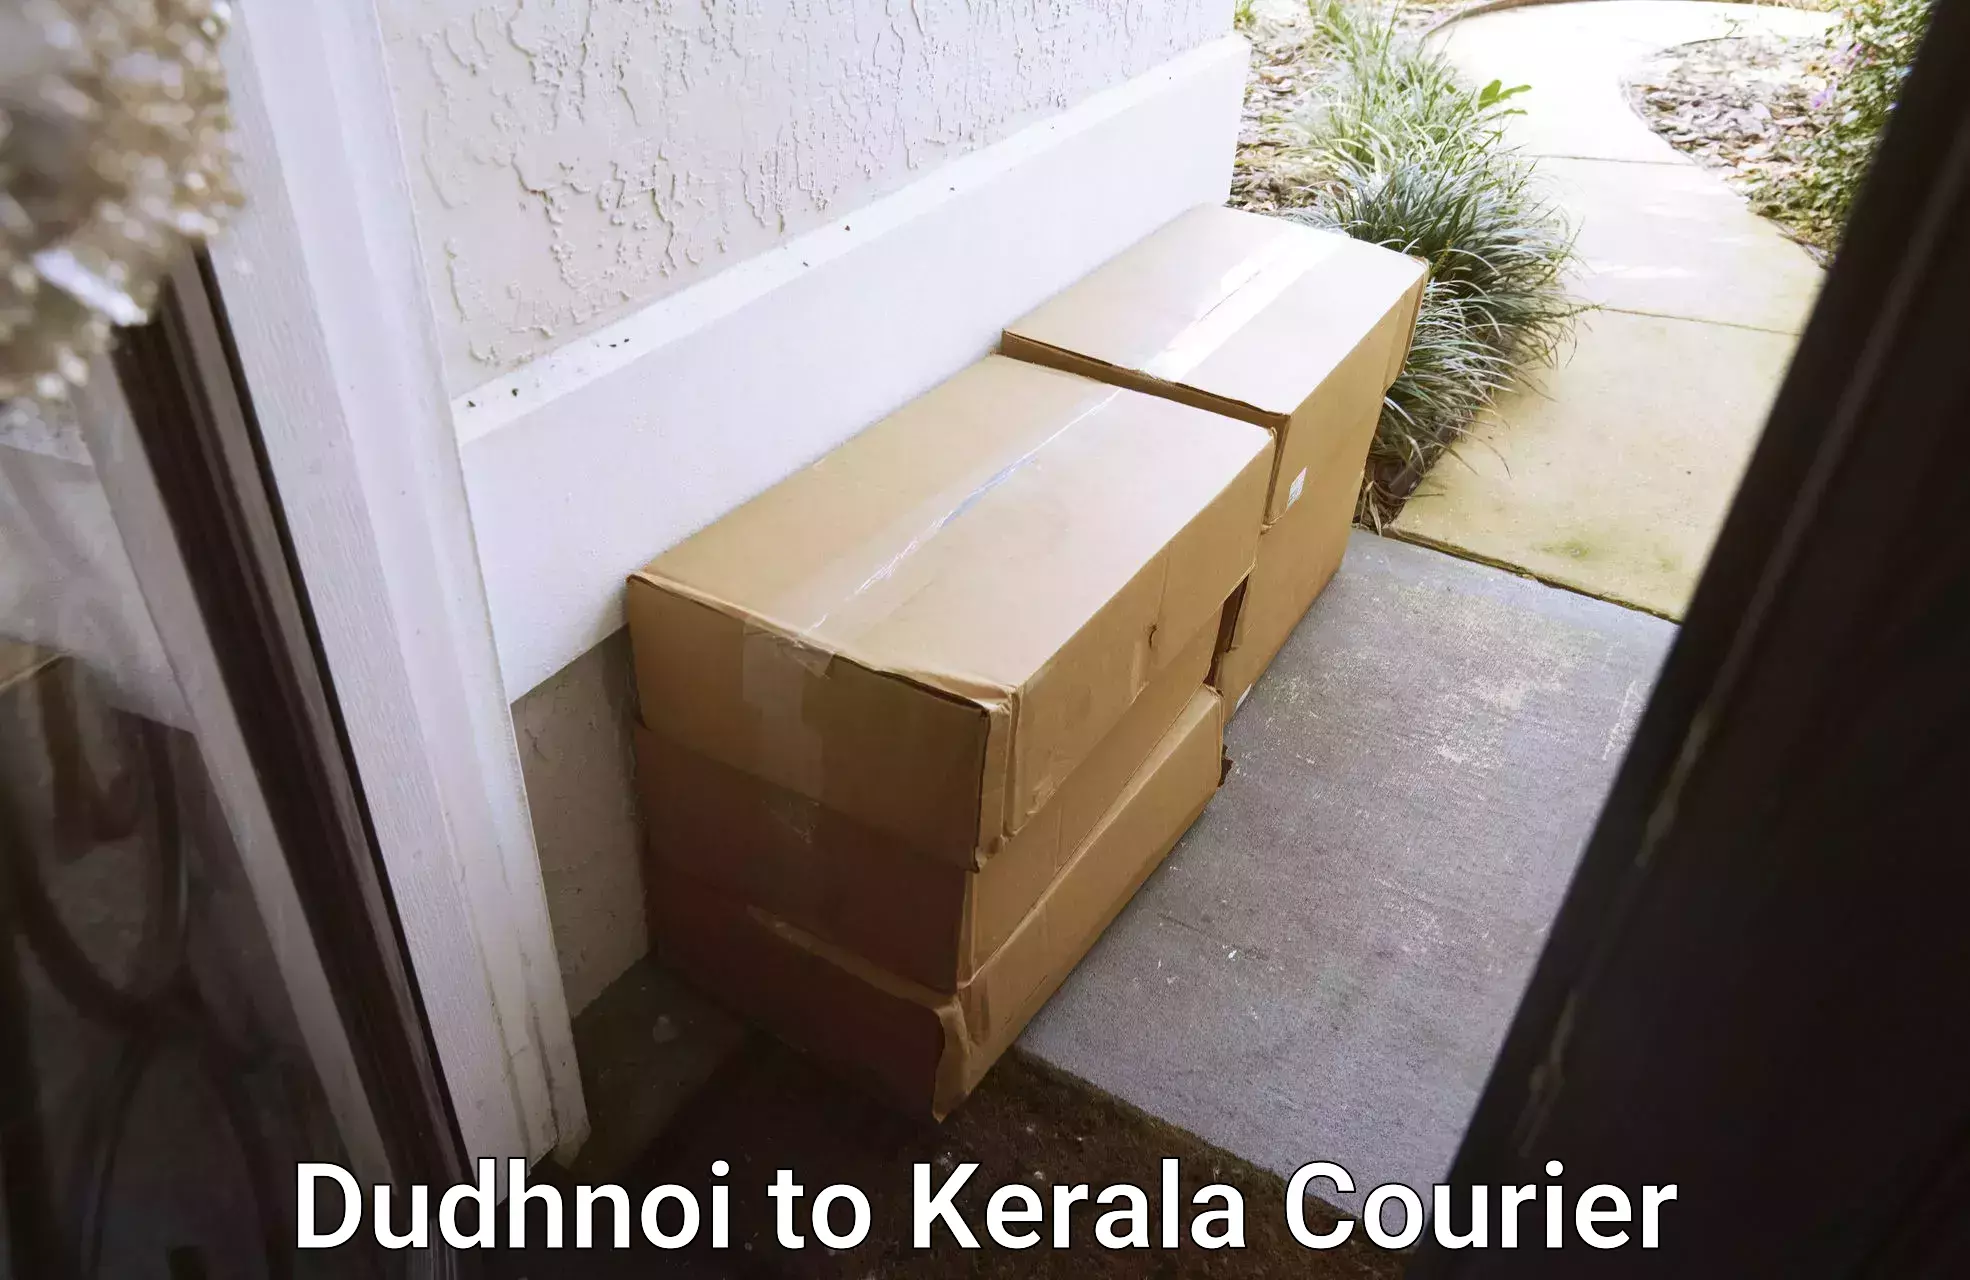 Full-service courier options in Dudhnoi to Mahe